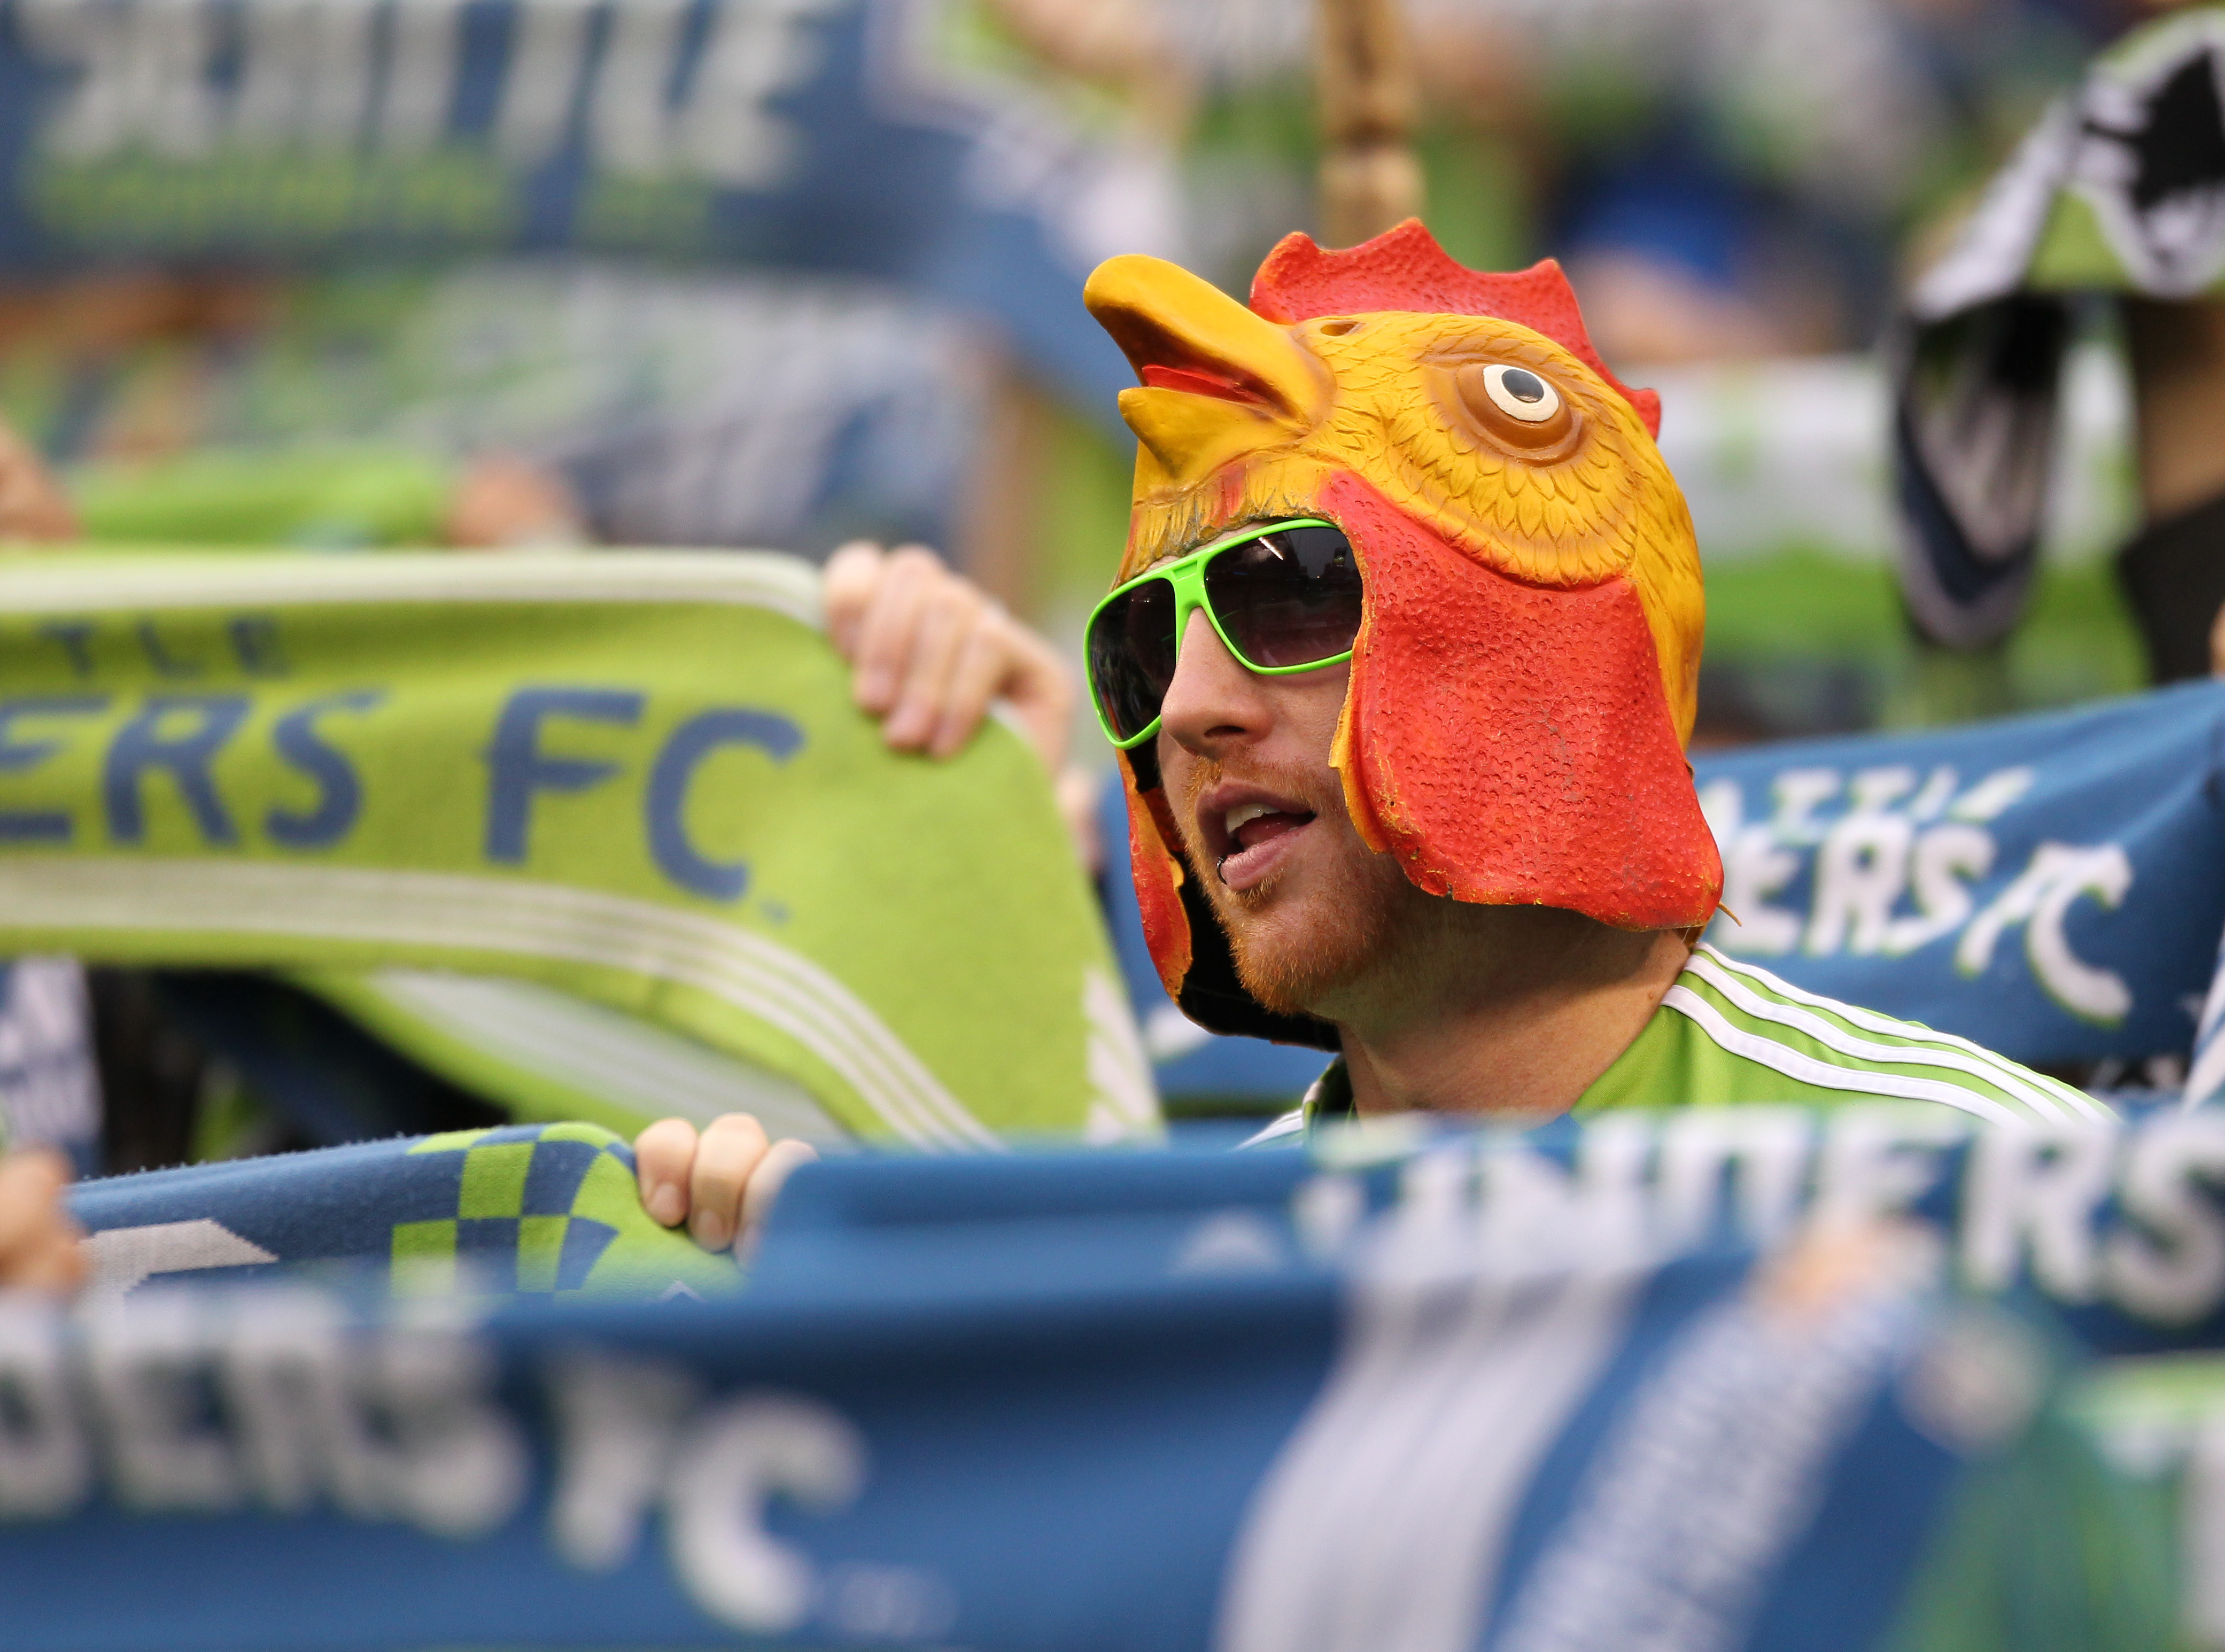 SEATTLE, WA - OCTOBER 31:  A fan of the Seattle Sounders FC looks on during the 1st leg playoff game against the Los Angeles Galaxy at Qwest Field on October 31, 2010 in Seattle, Washington. The Galaxy defeated the Sounders 1-0. (Photo by Otto Greule Jr/G